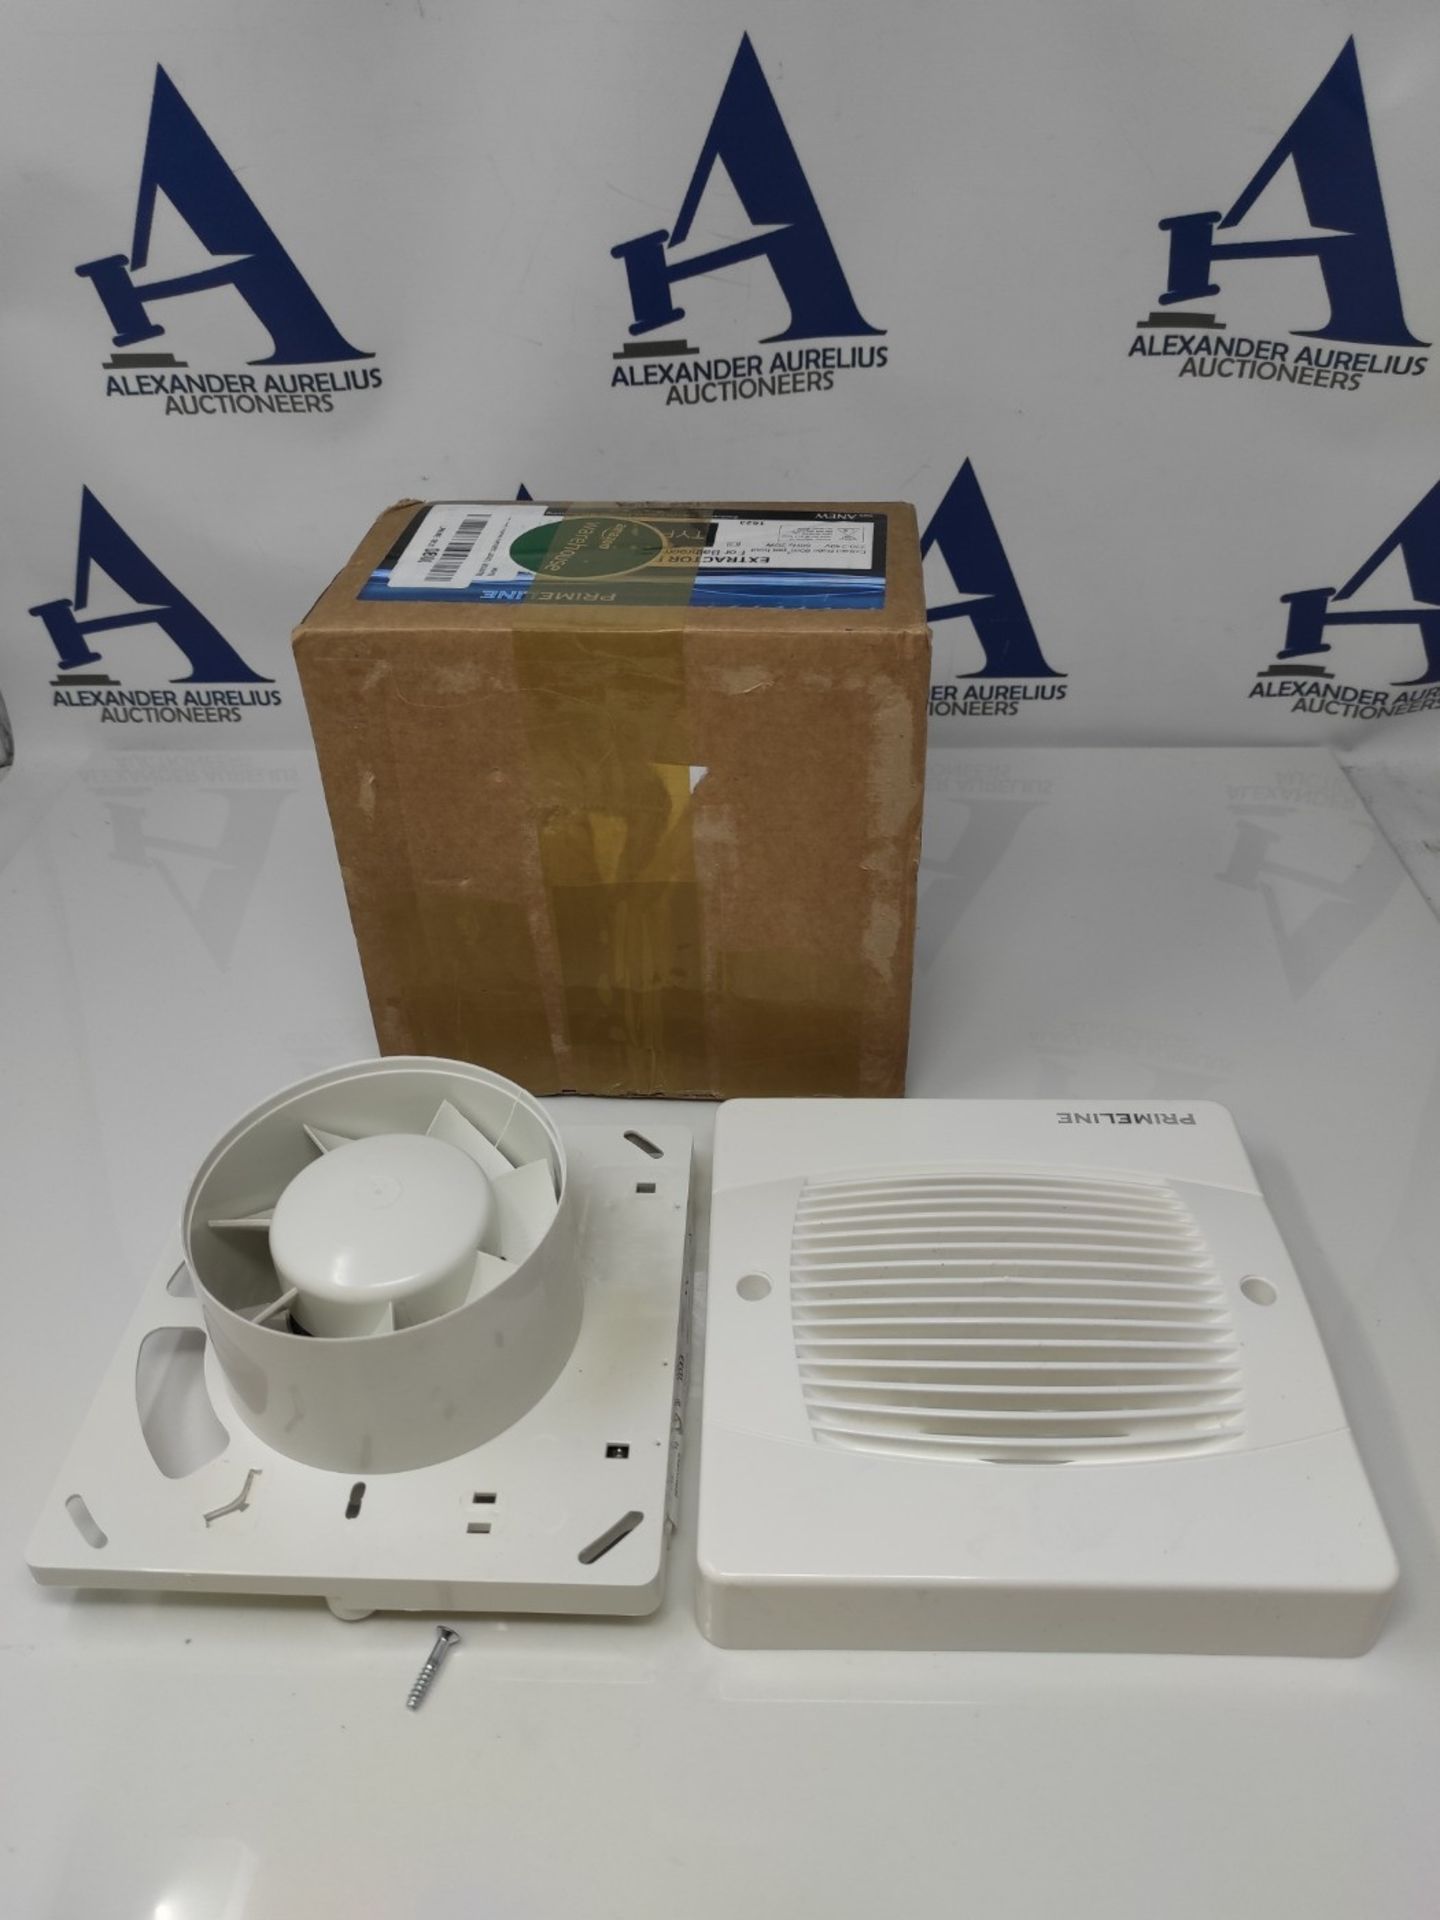 Primeline PEF4020 Extractor Fan 4" with Run on Timer